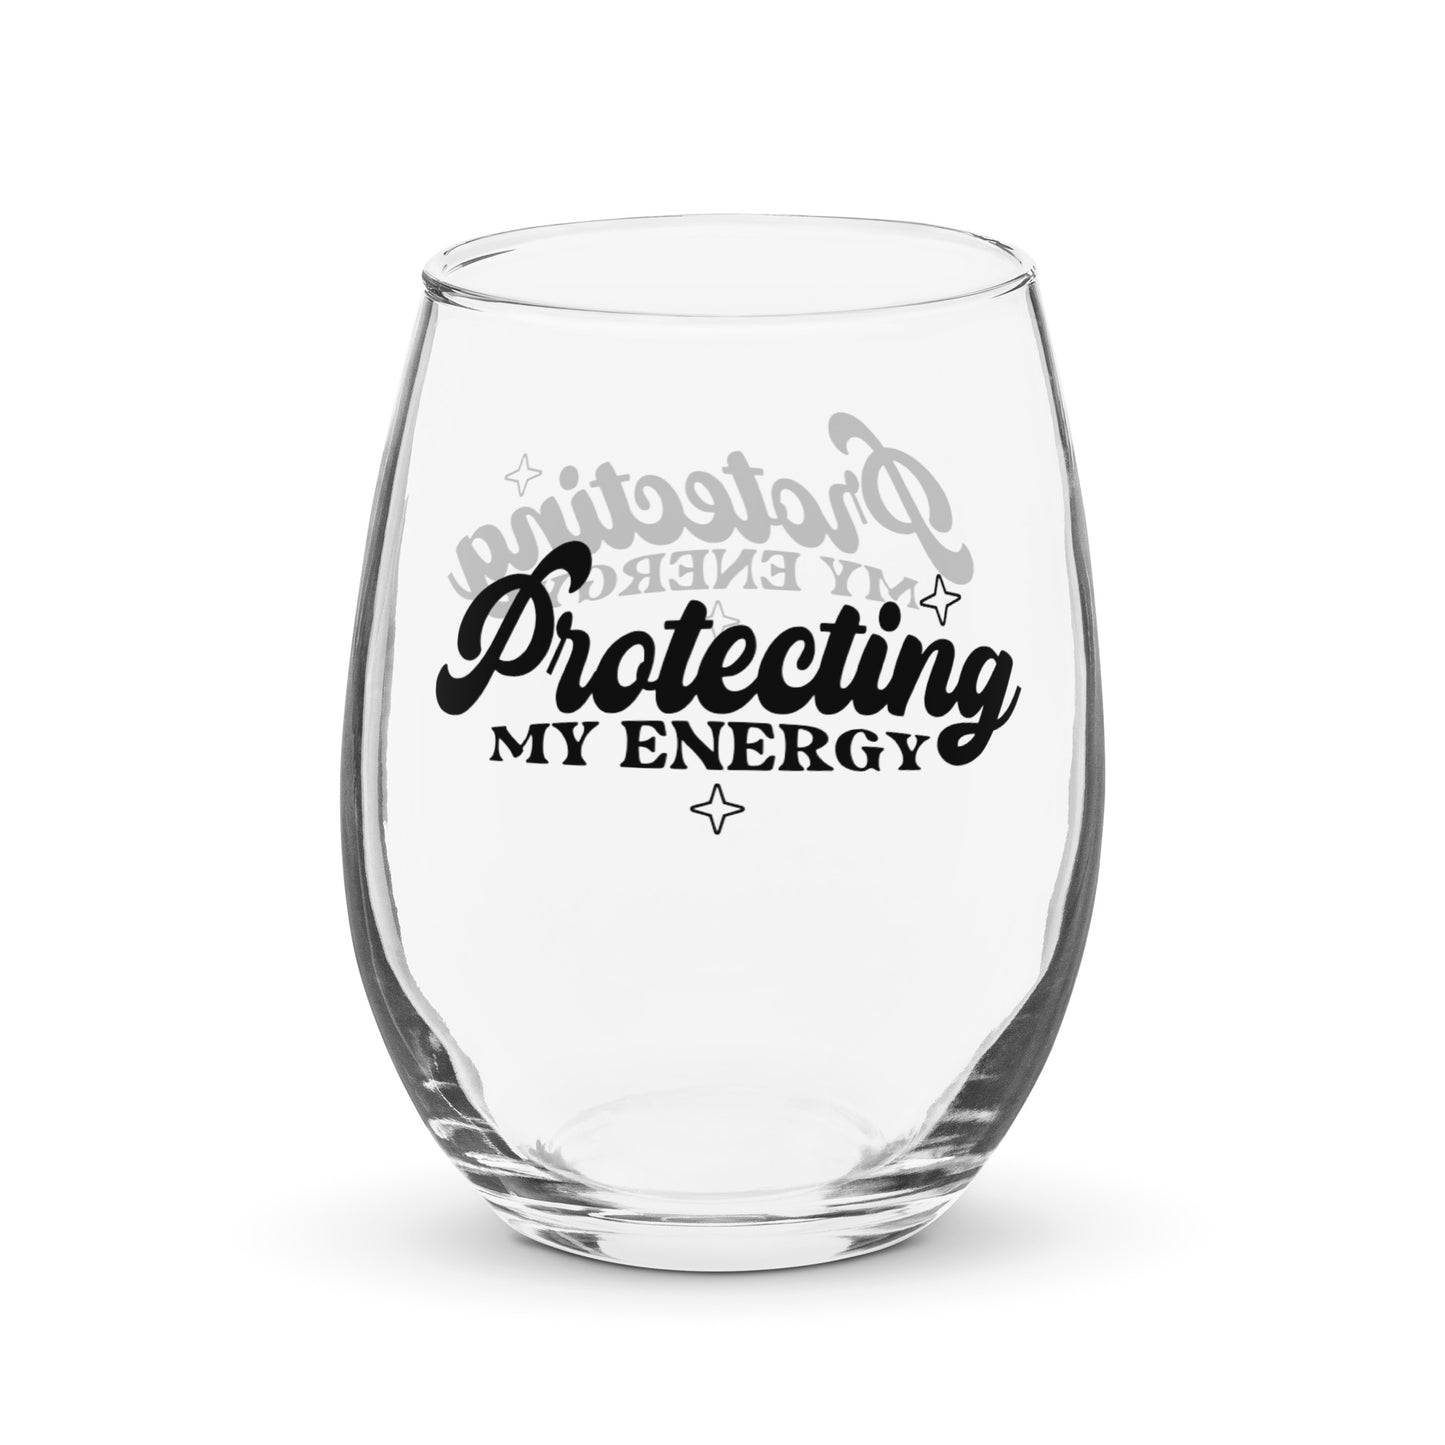 Protecting My Energy Stemless Wine Glass